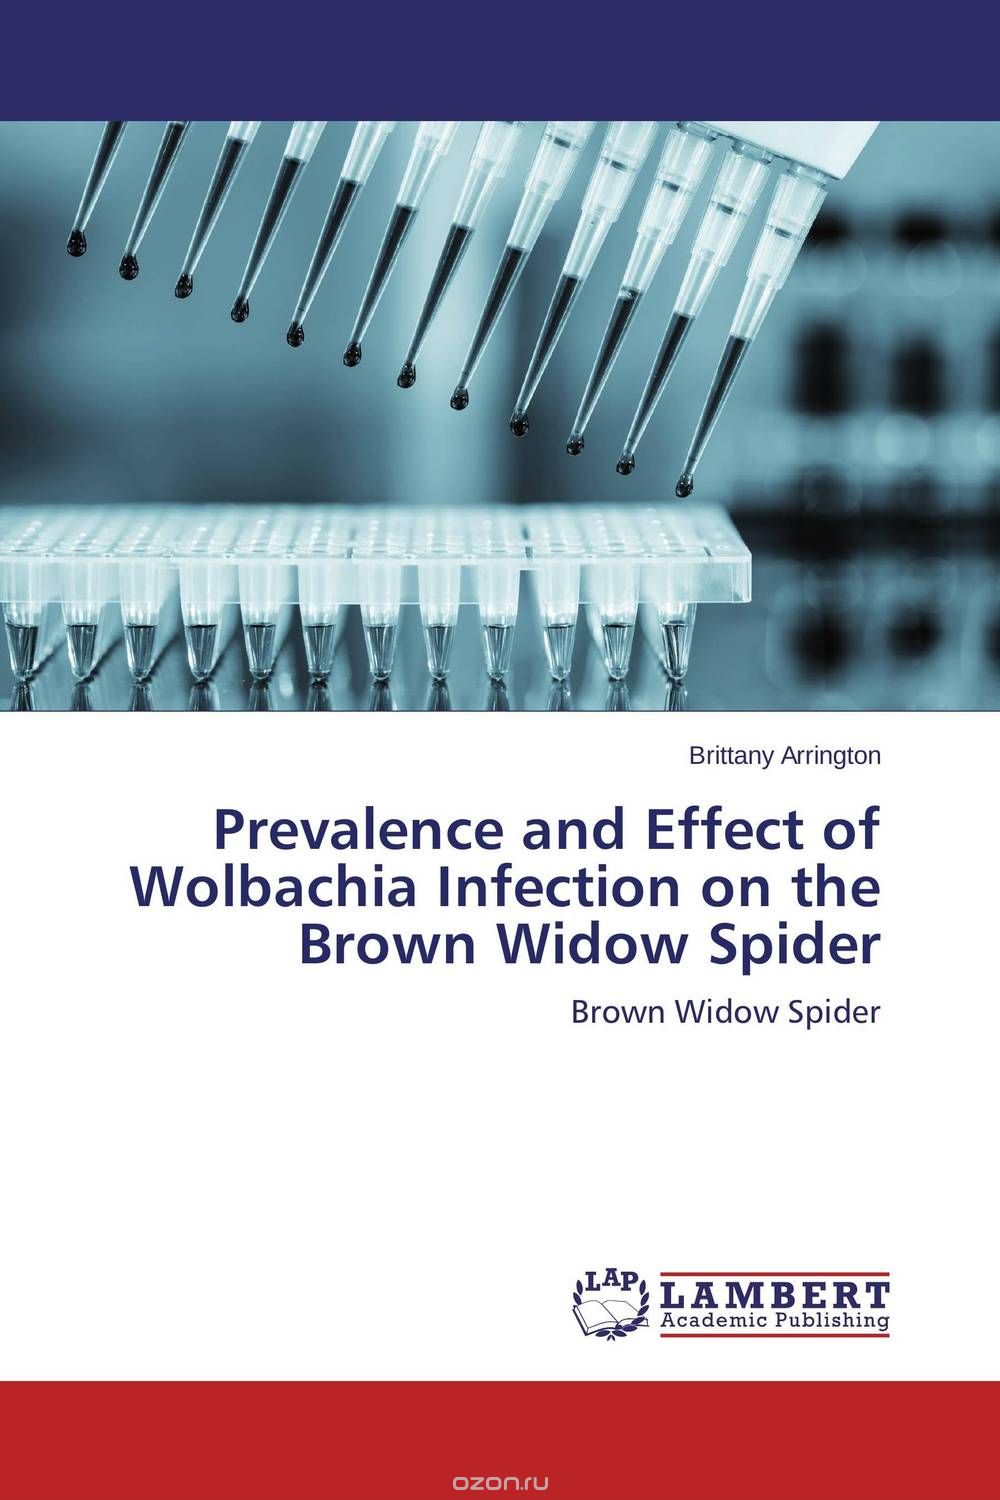 Prevalence and Effect of Wolbachia Infection on the Brown Widow Spider